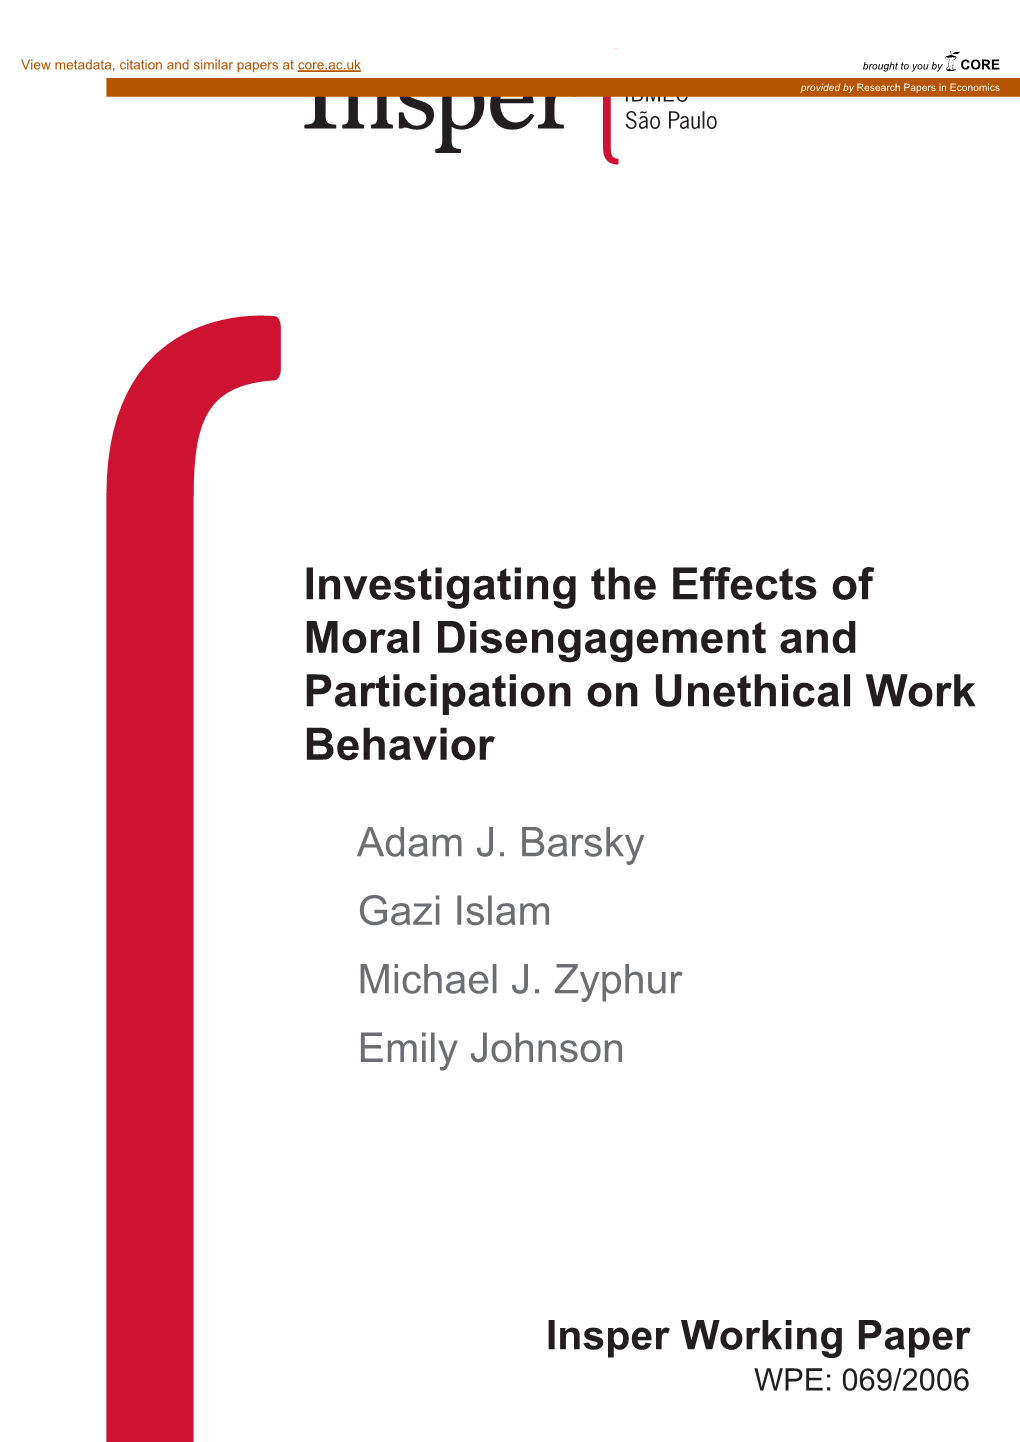 Investigating the Effects of Moral Disengagement and Participation on Unethical Work Behavior